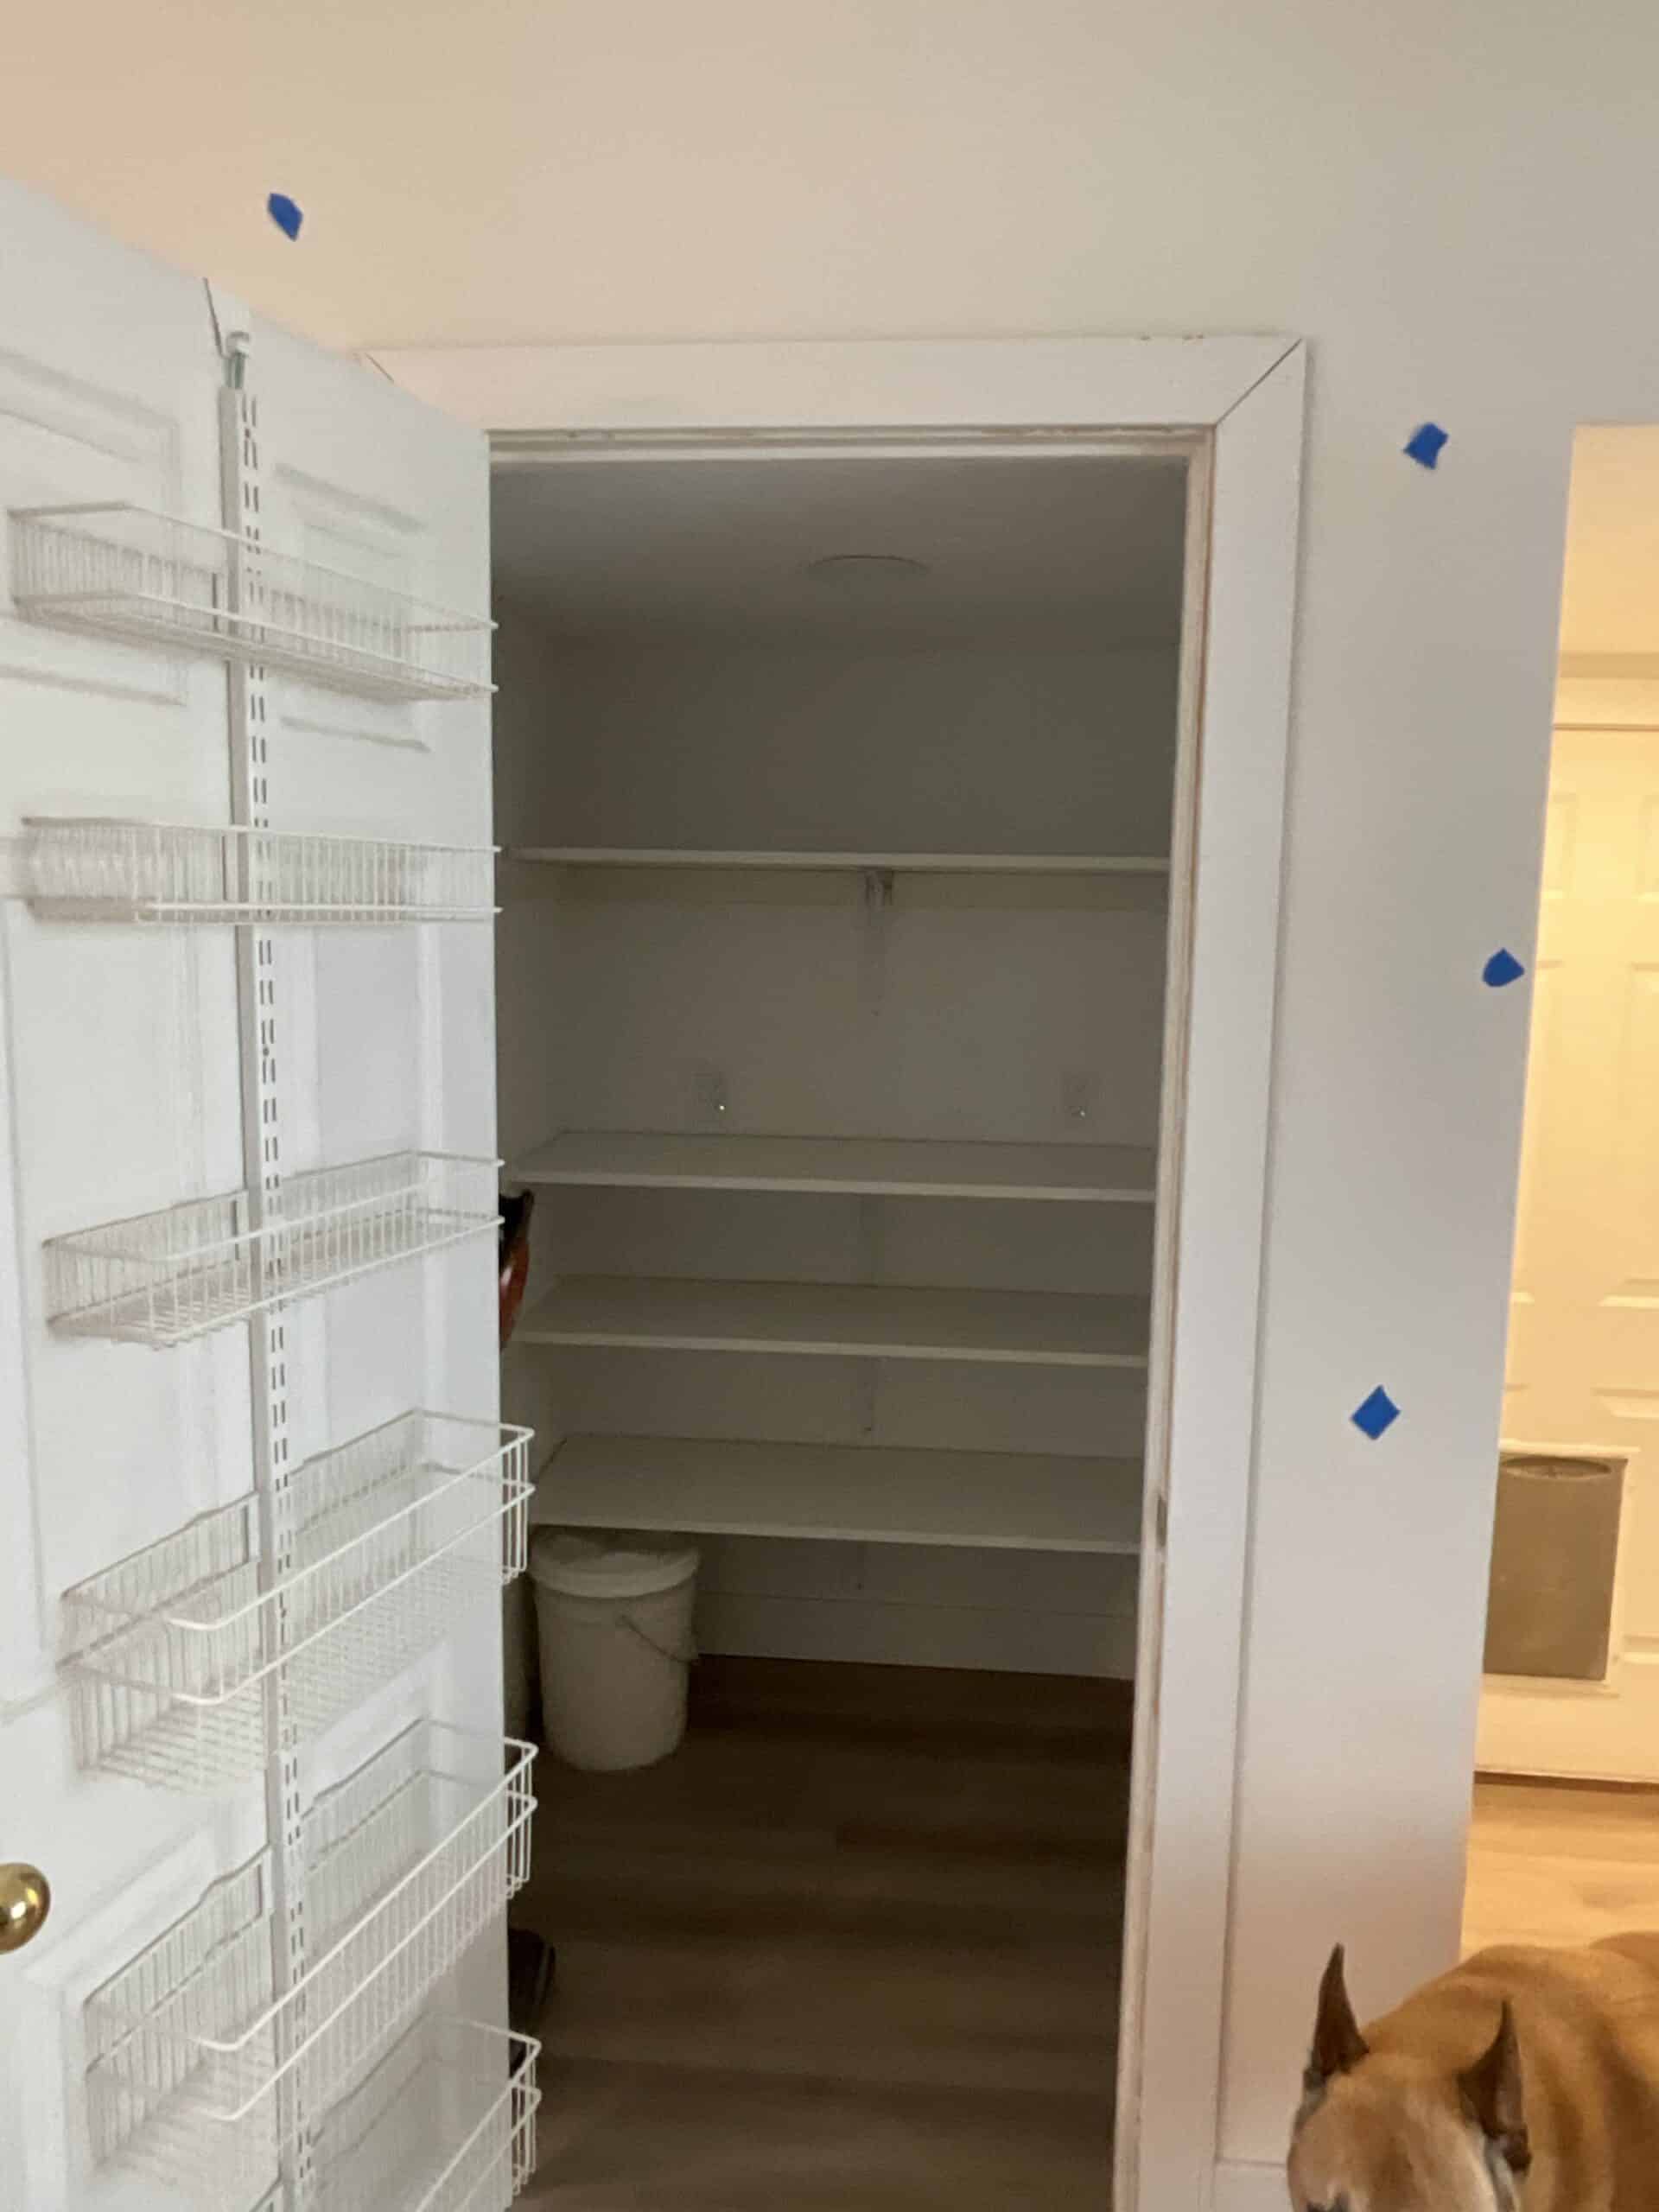 Here is a custom built kitchen pantry add on with plenty of shelf space.